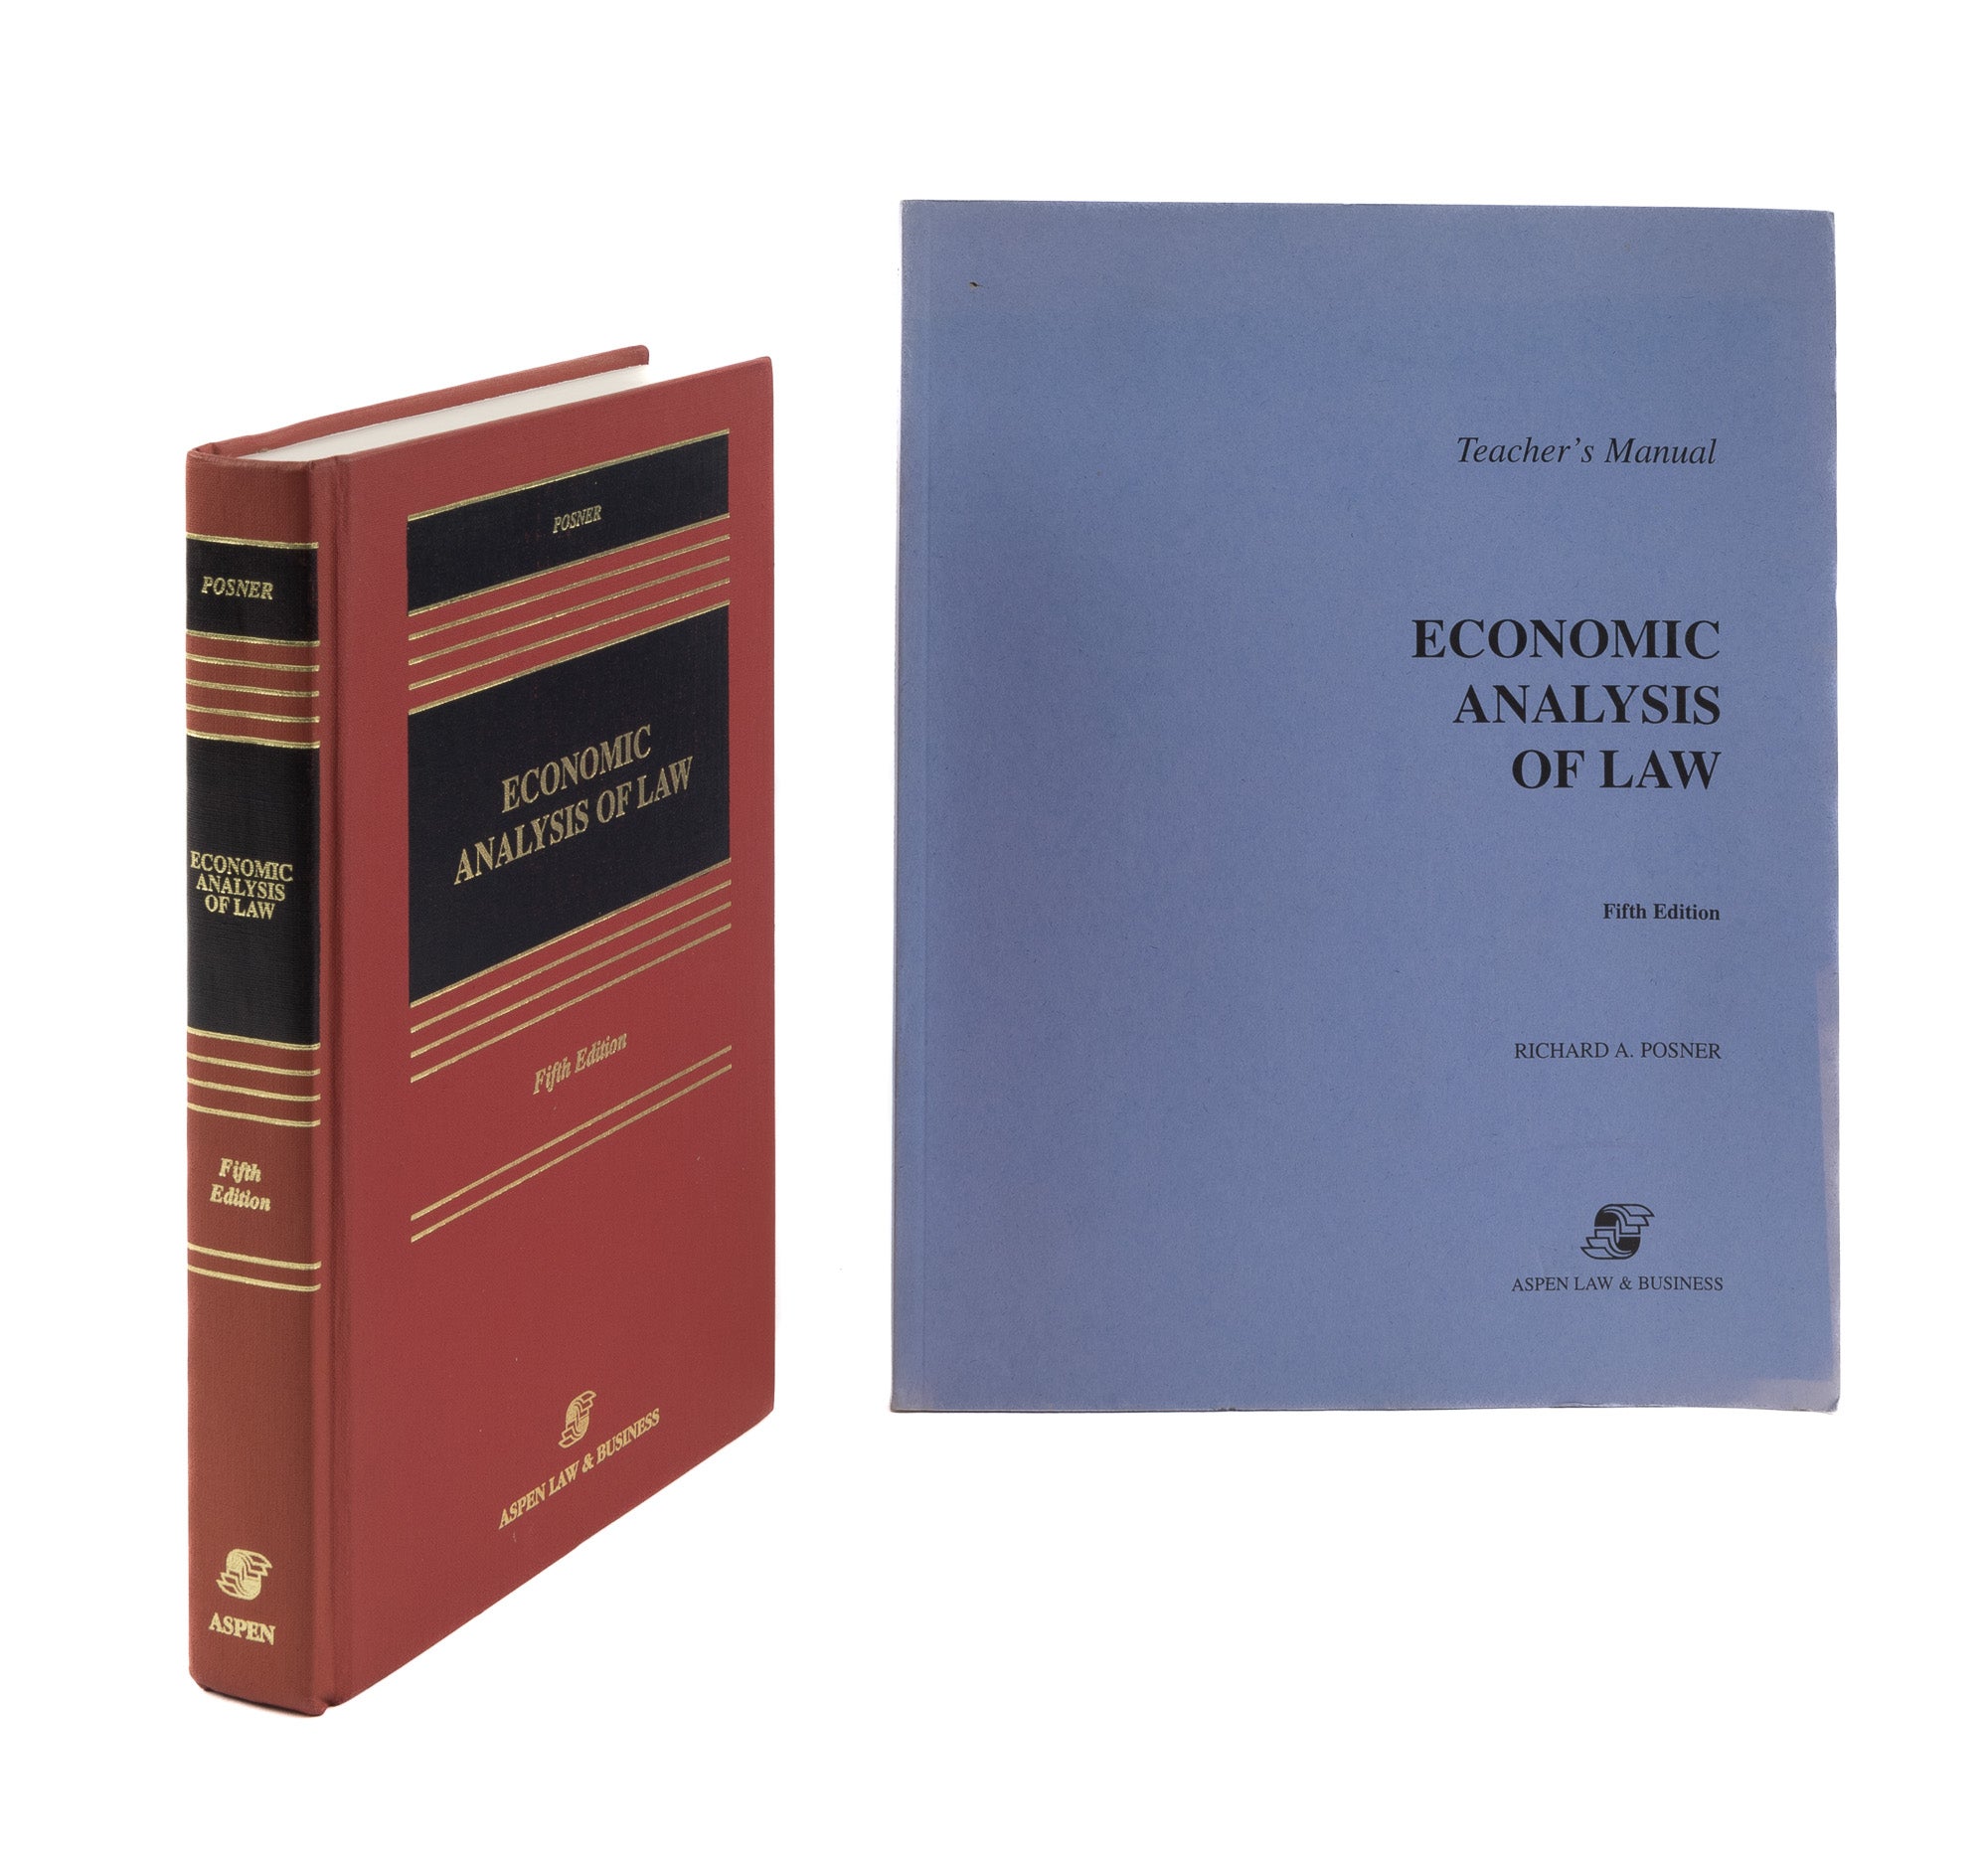 Economic Analysis of Law, Fifth Edition with Teacher's Manual ...